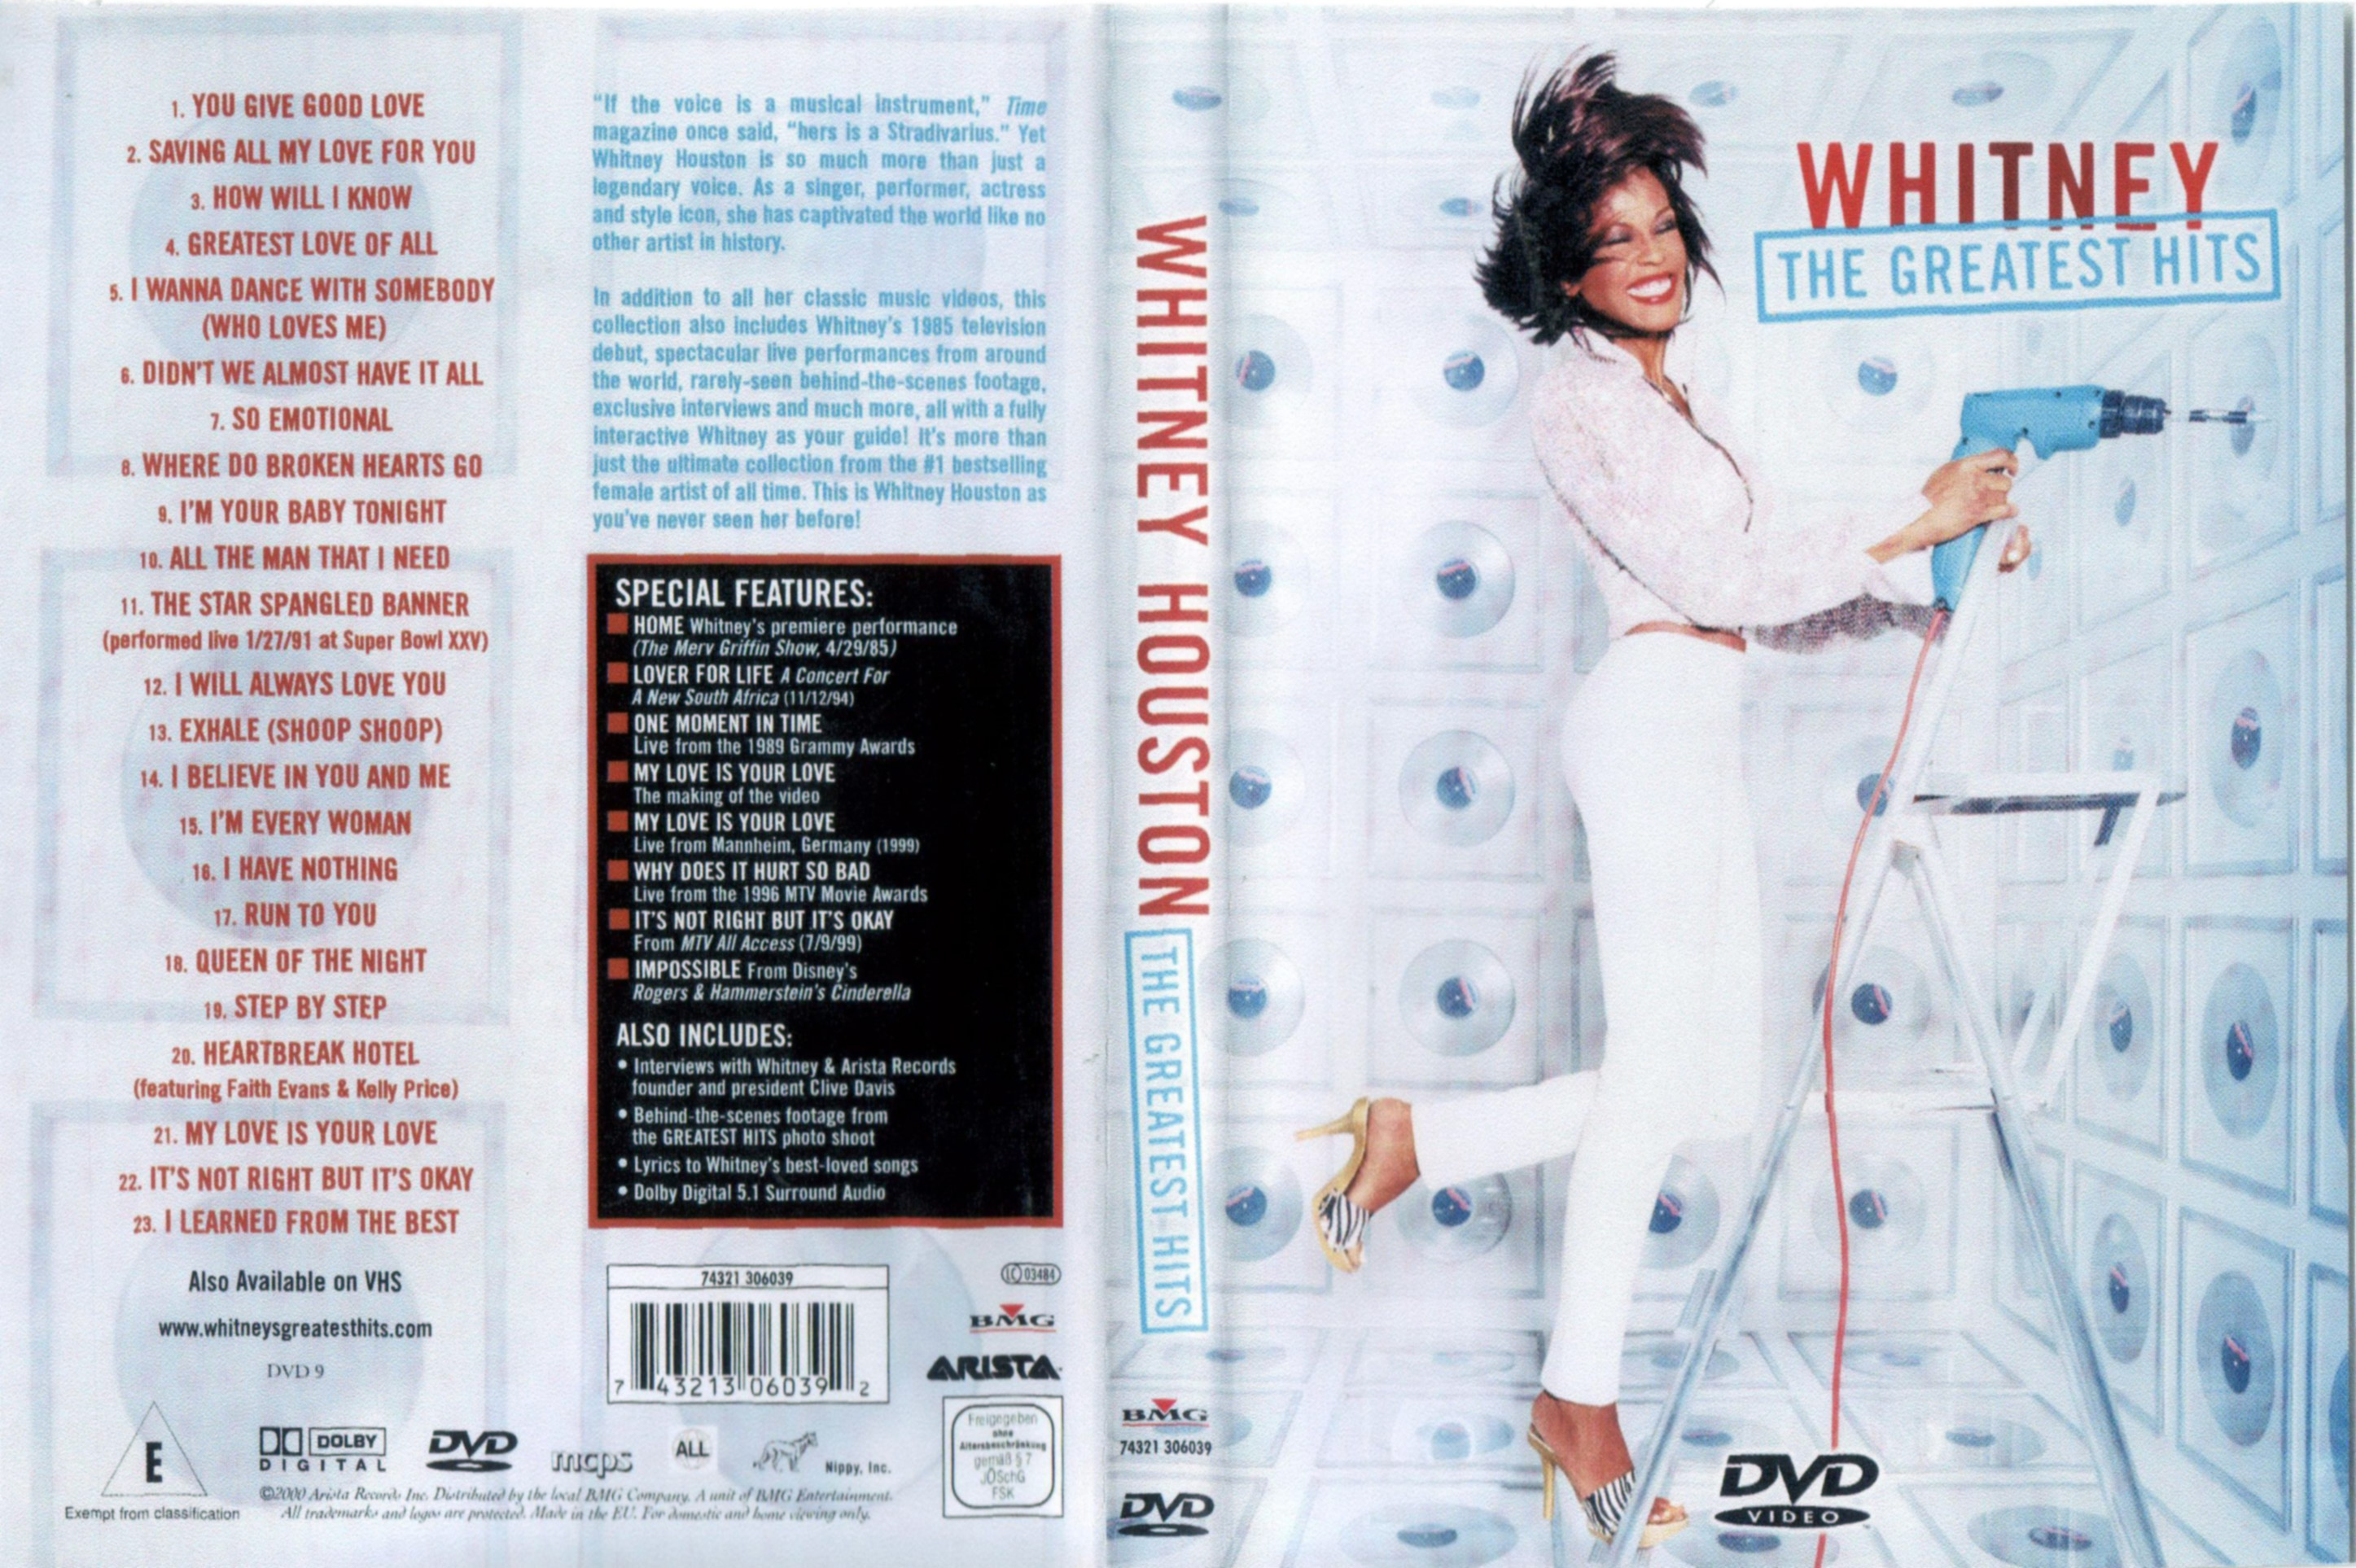 Jaquette DVD Whitney Houston The greatest hits